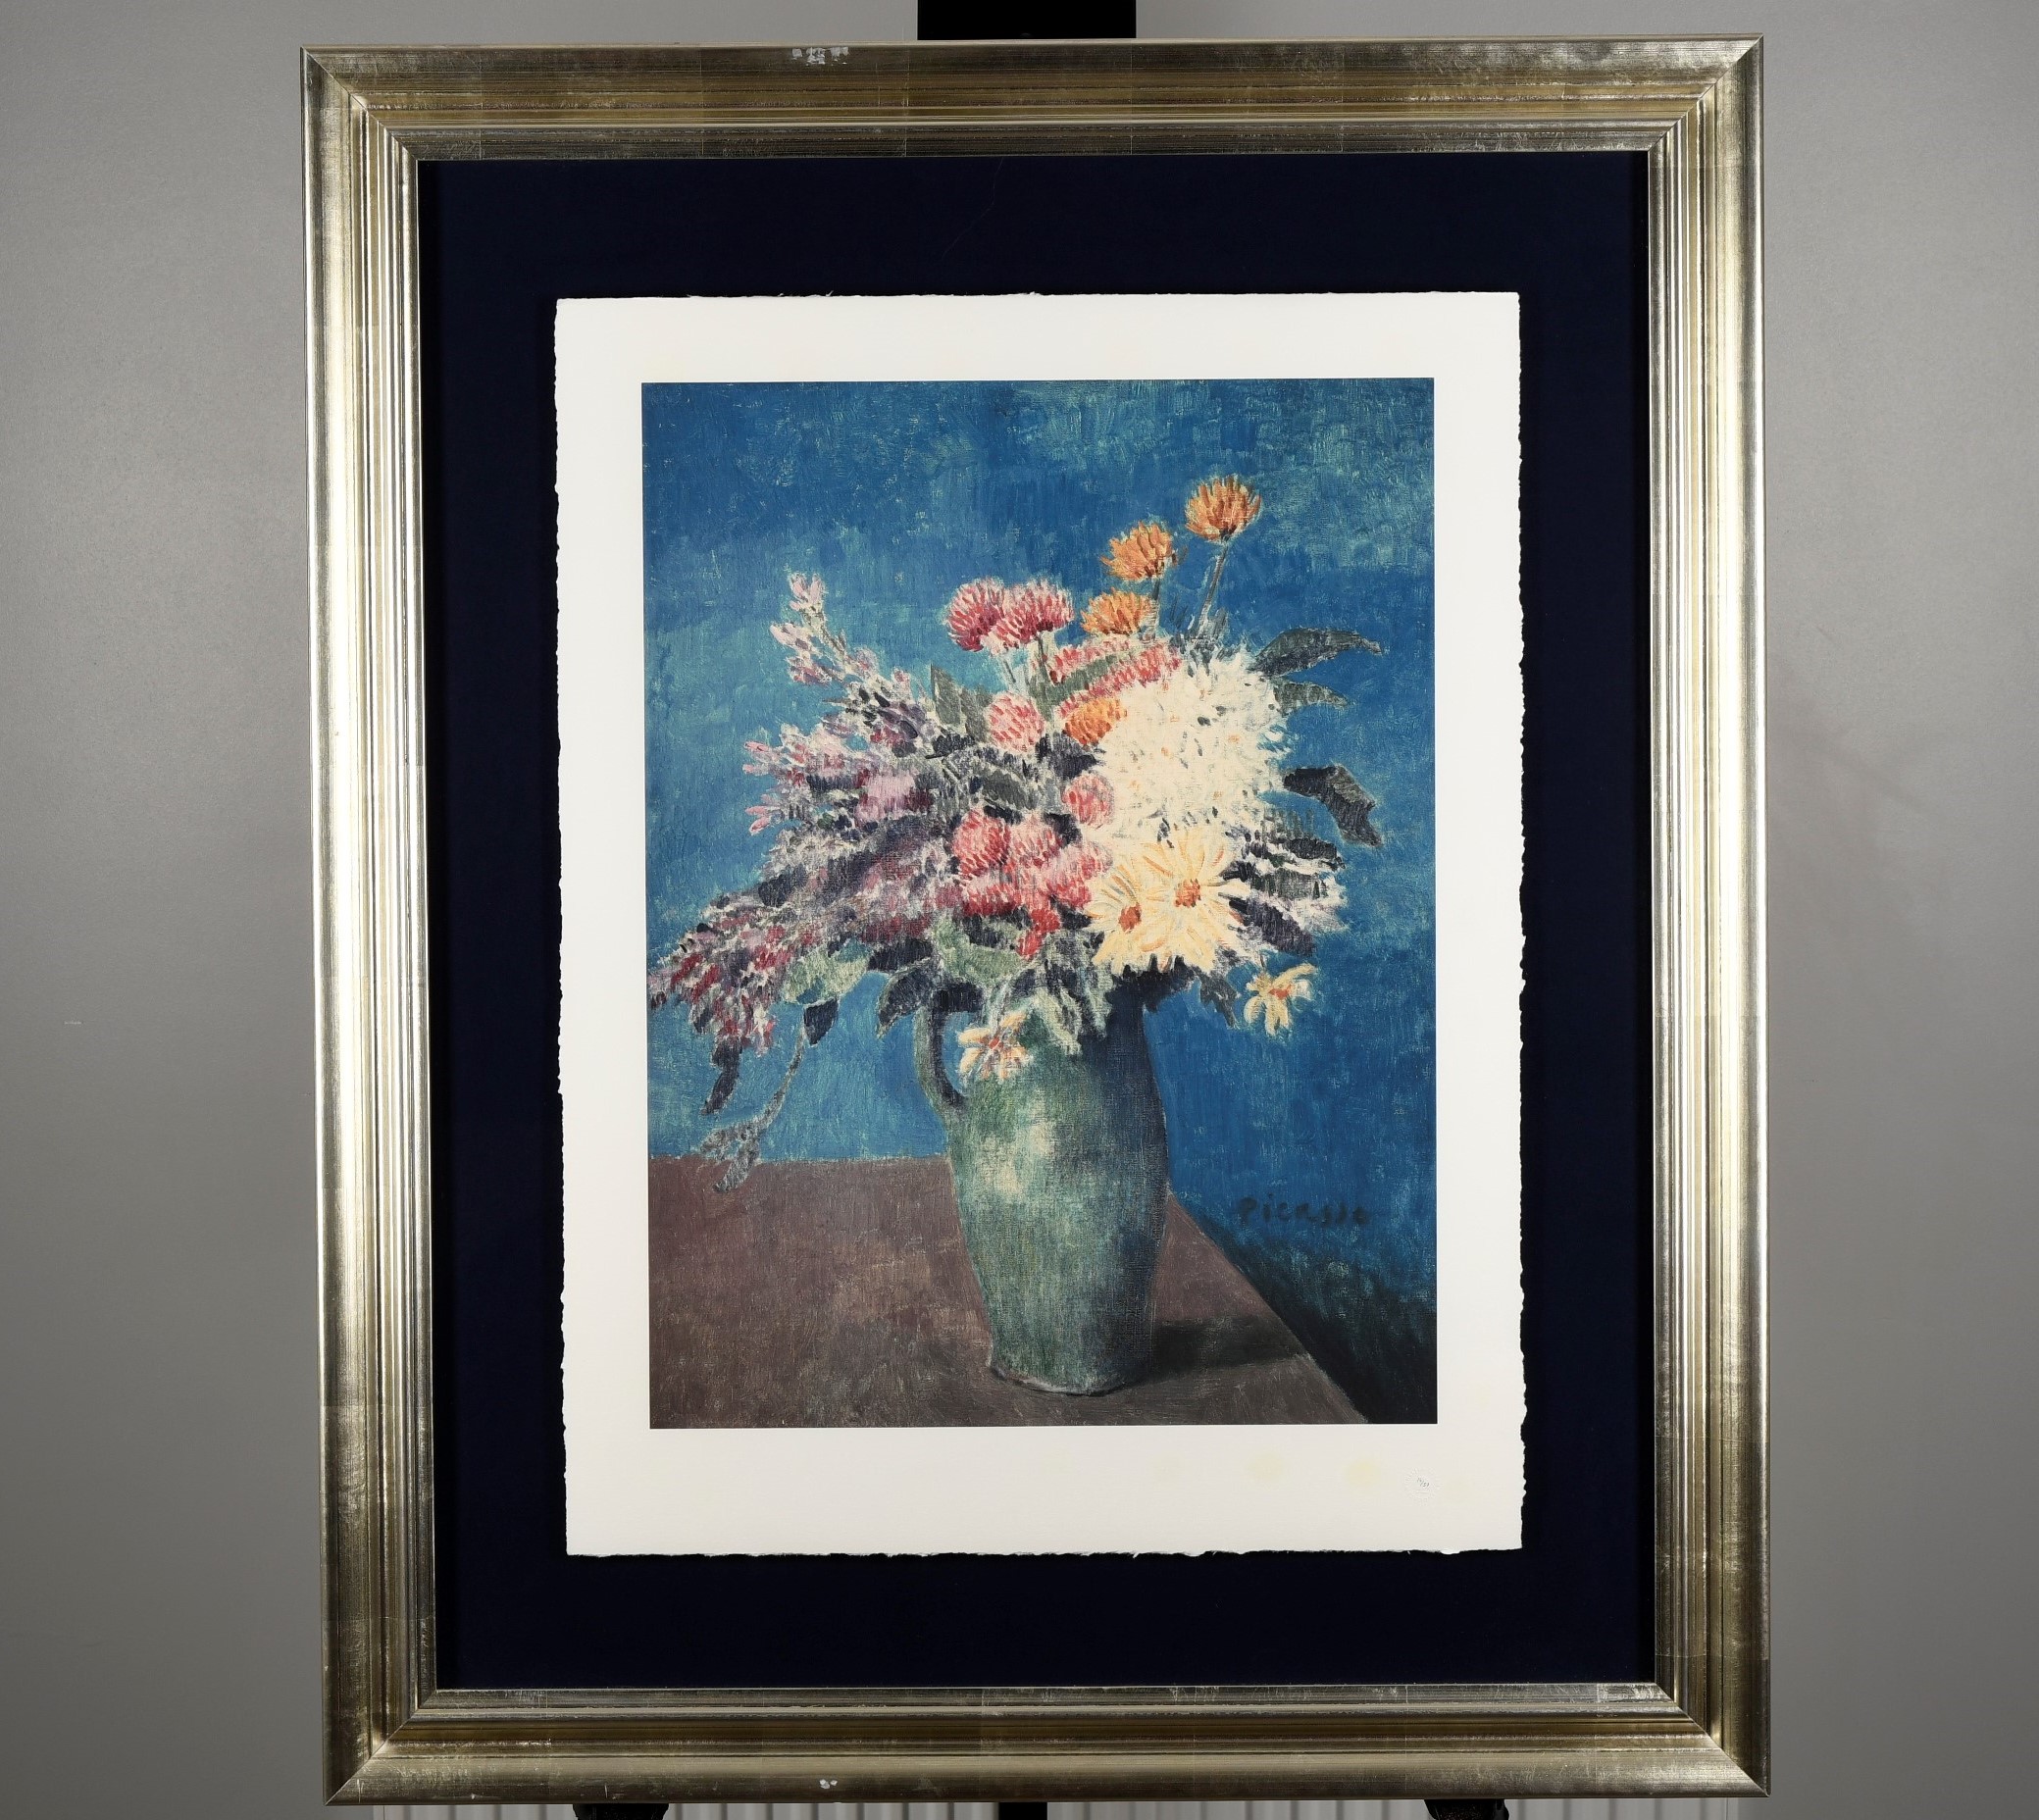 Limited Edition by Pablo Picasso "Vase of Flowers"